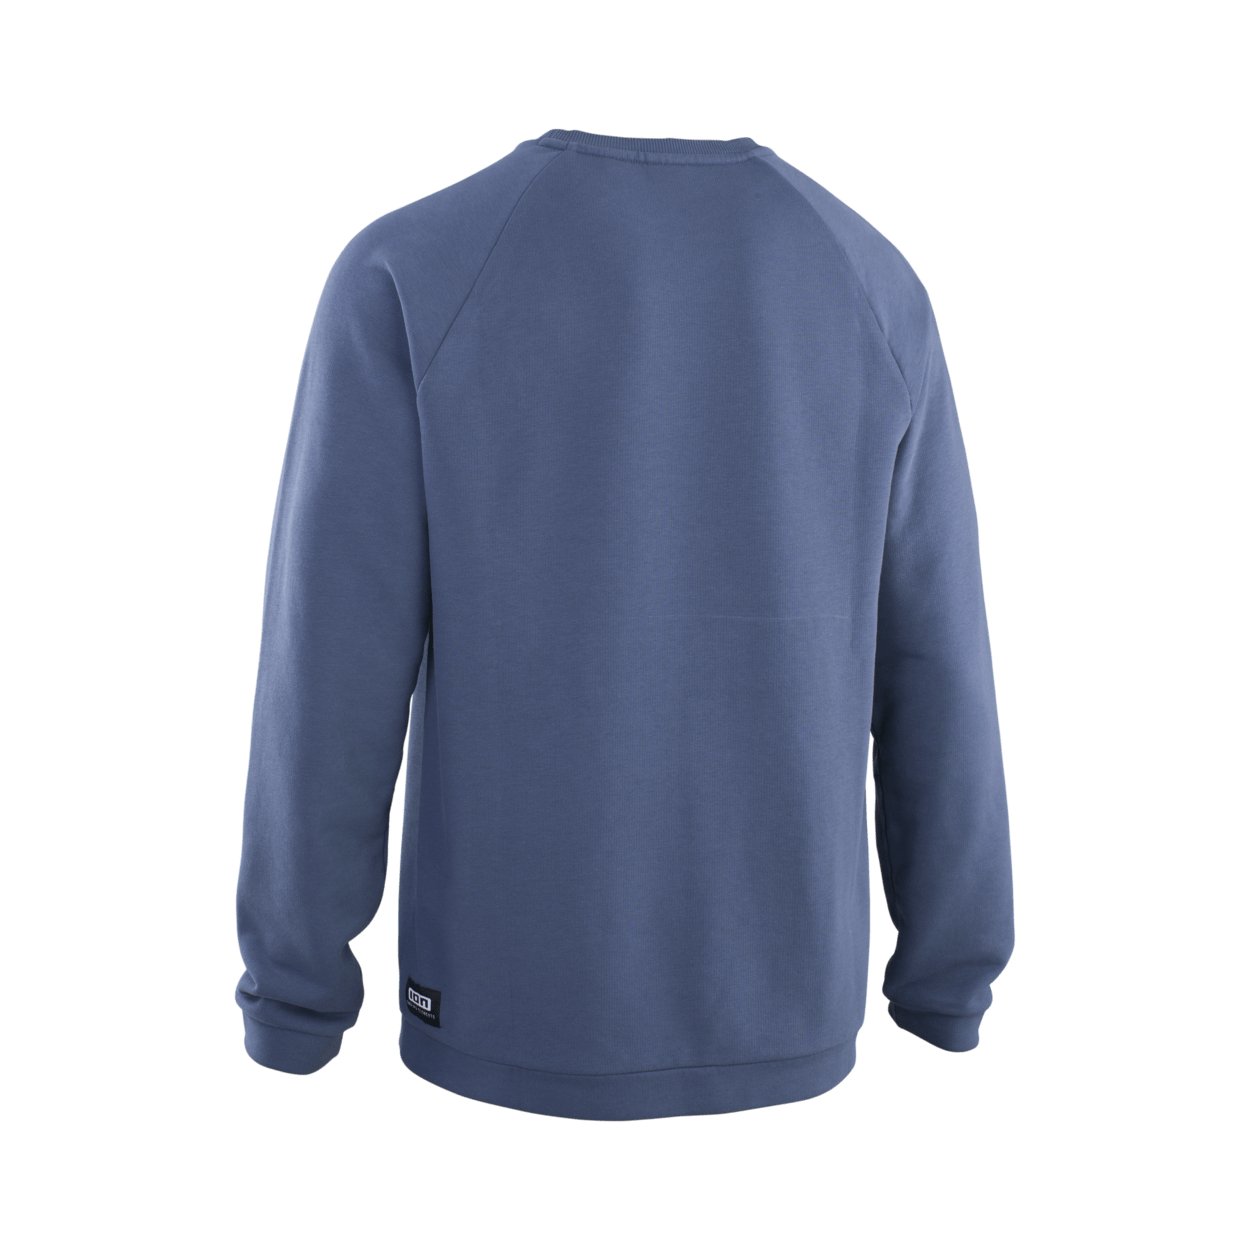 ION Men Sweater Surfing Elements 2023 - Worthing Watersports - 9010583106182 - Apparel - ION Bike